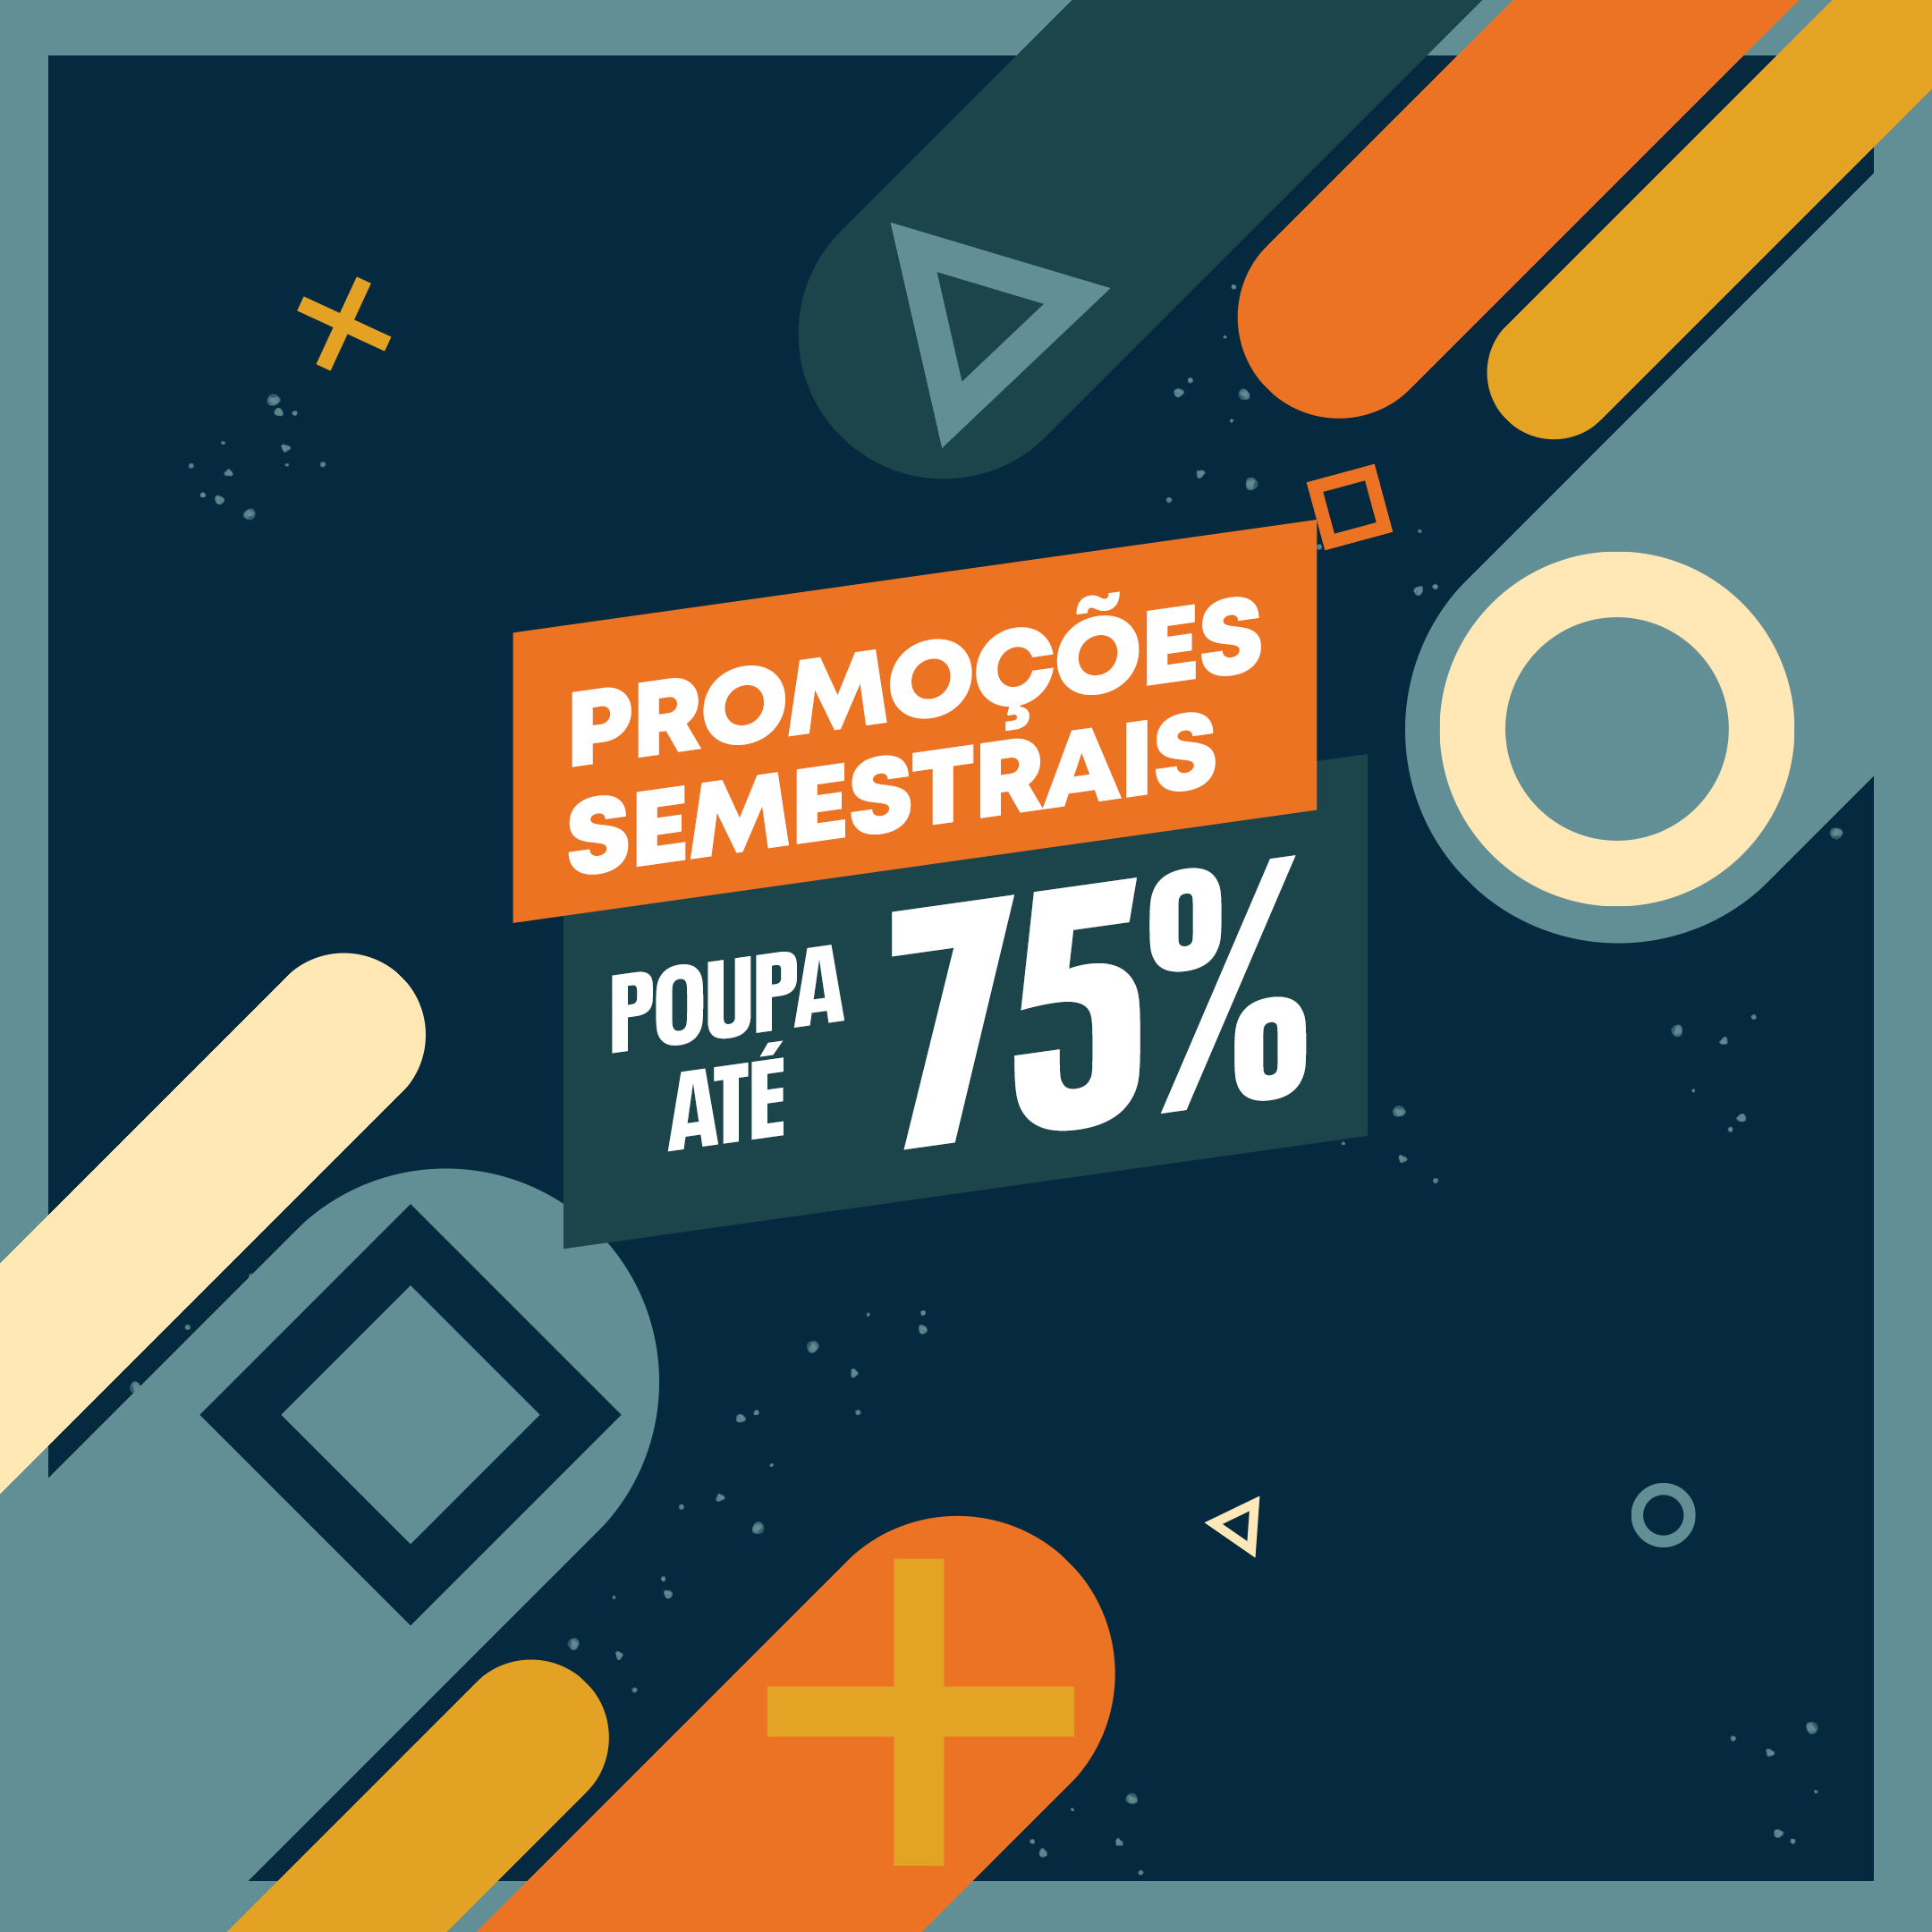 [PROMO]Mid-Year Deals 22